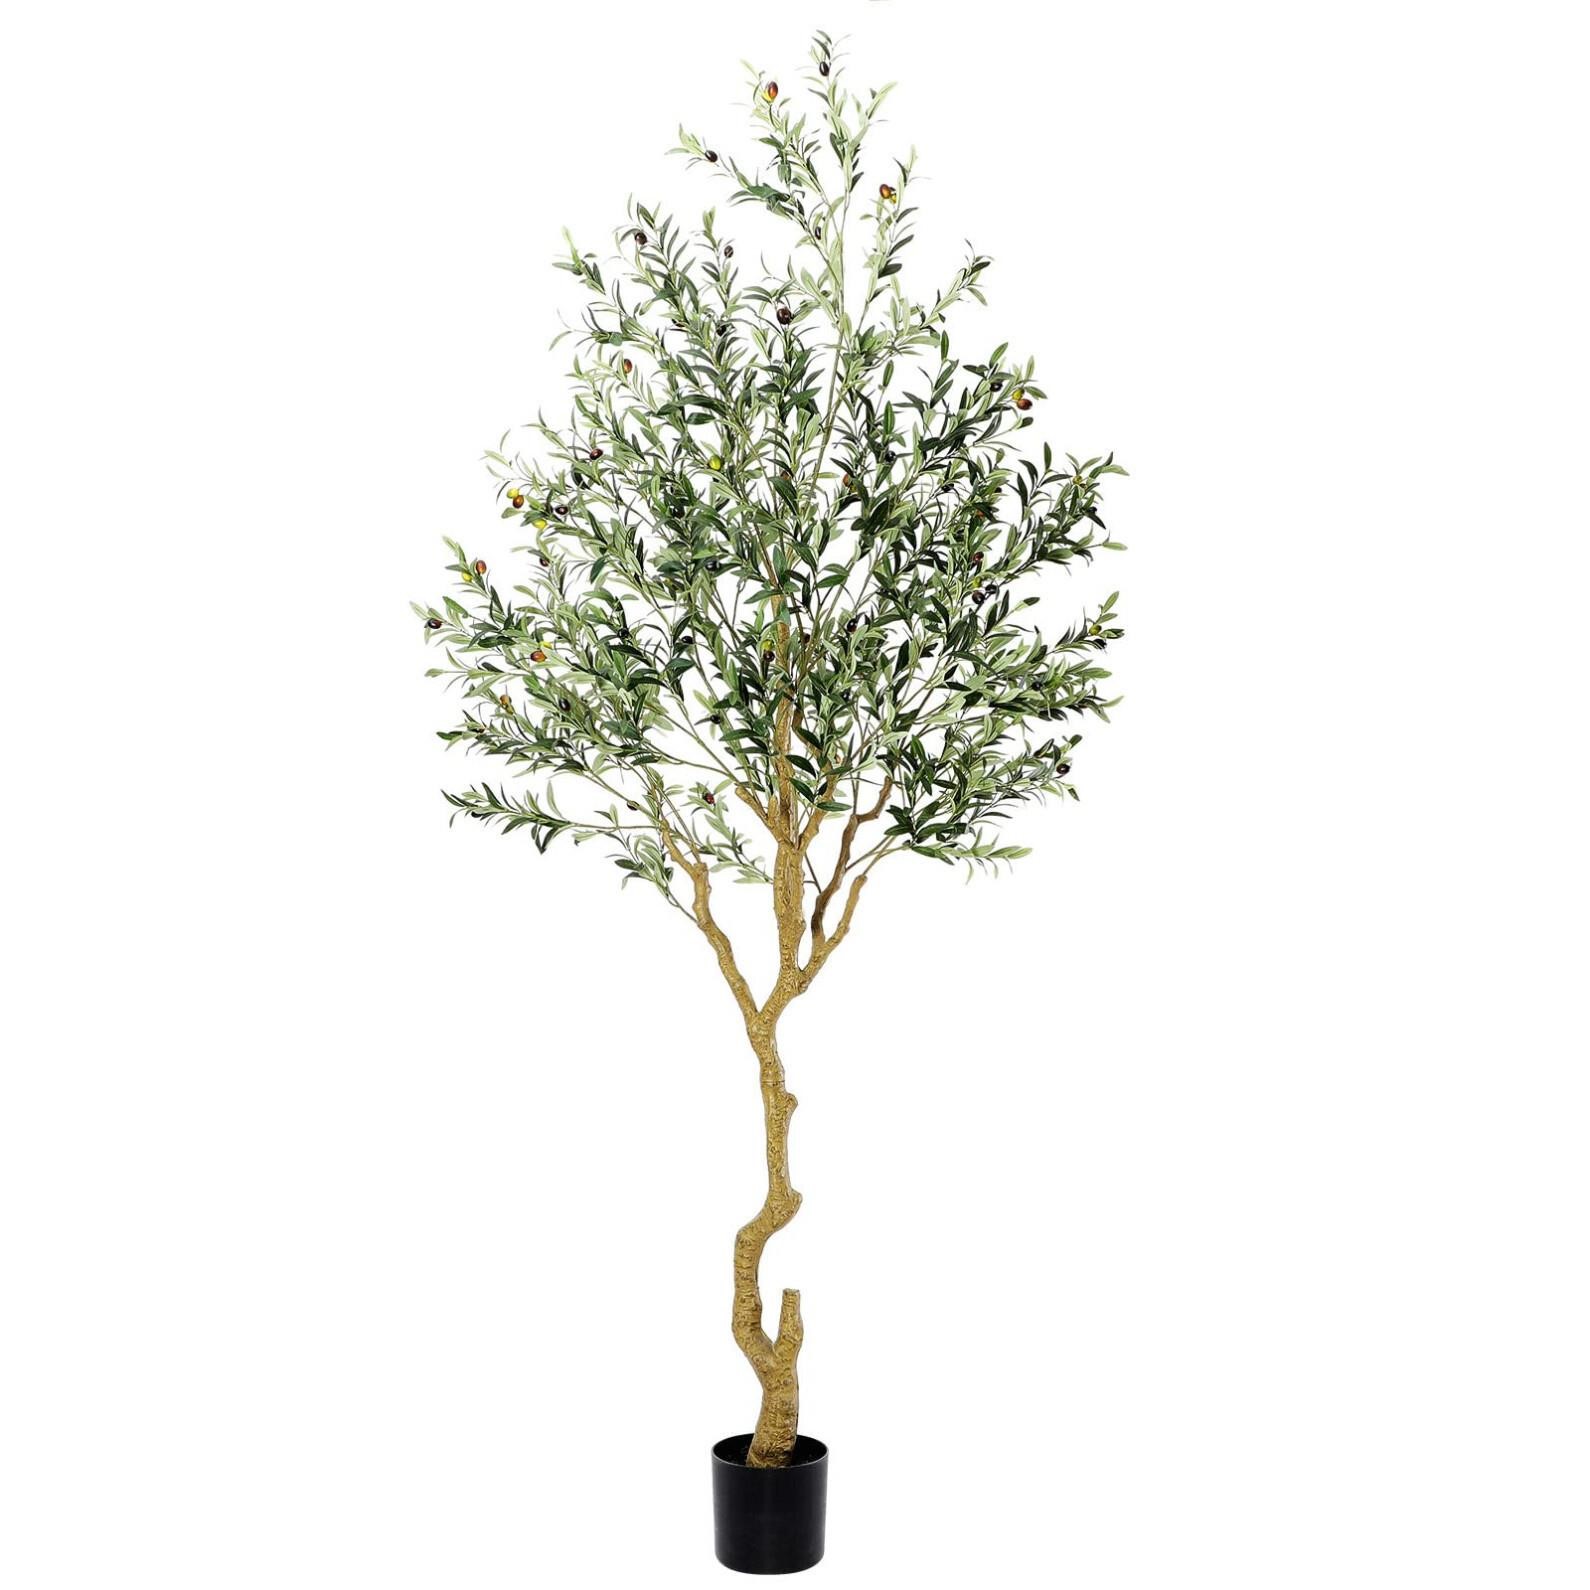 Nafresh Tall Faux Olive Tree,8ft(96in) Realistic P